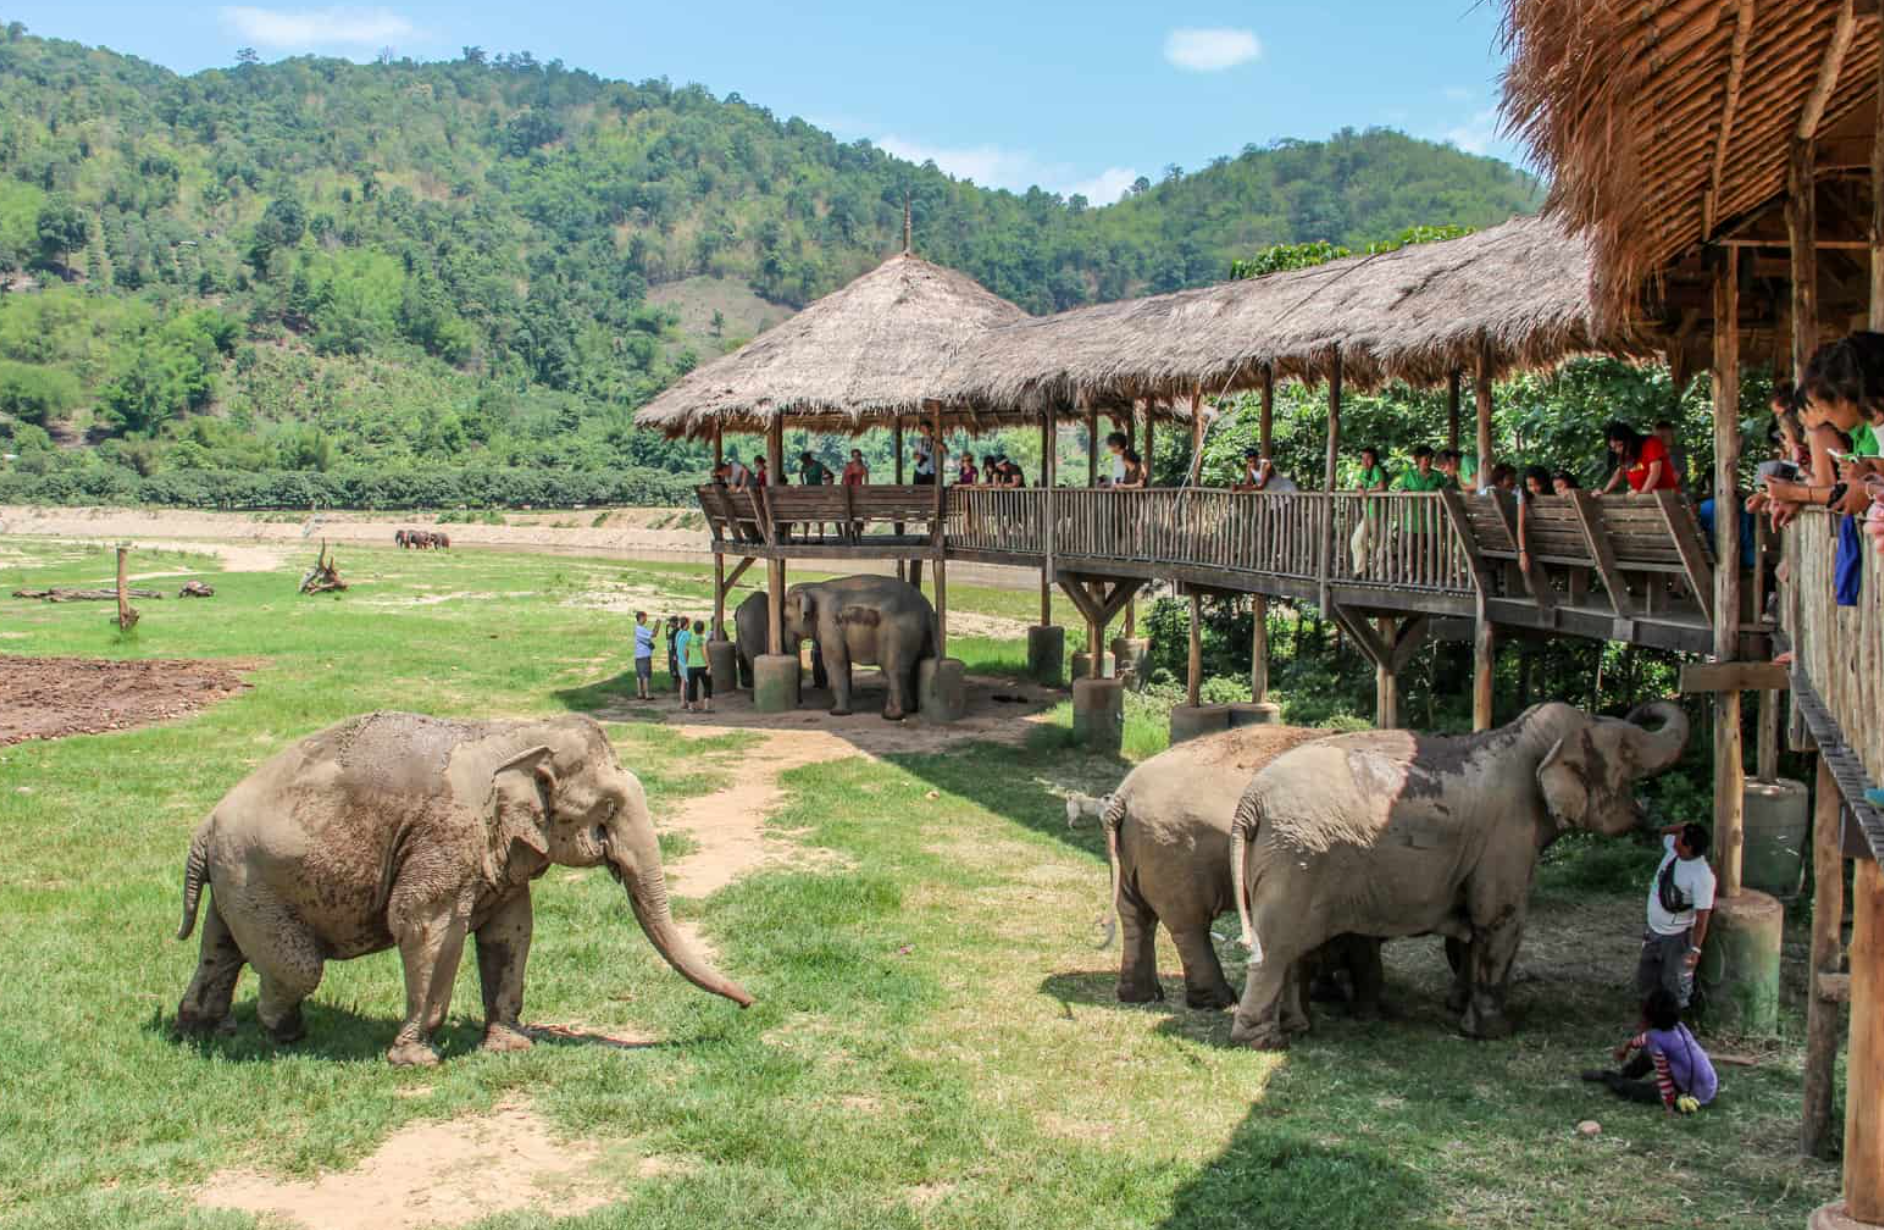 For a unique thing to do in Thailand, visit the Elephant Nature Park for an ethical elephant encounter.